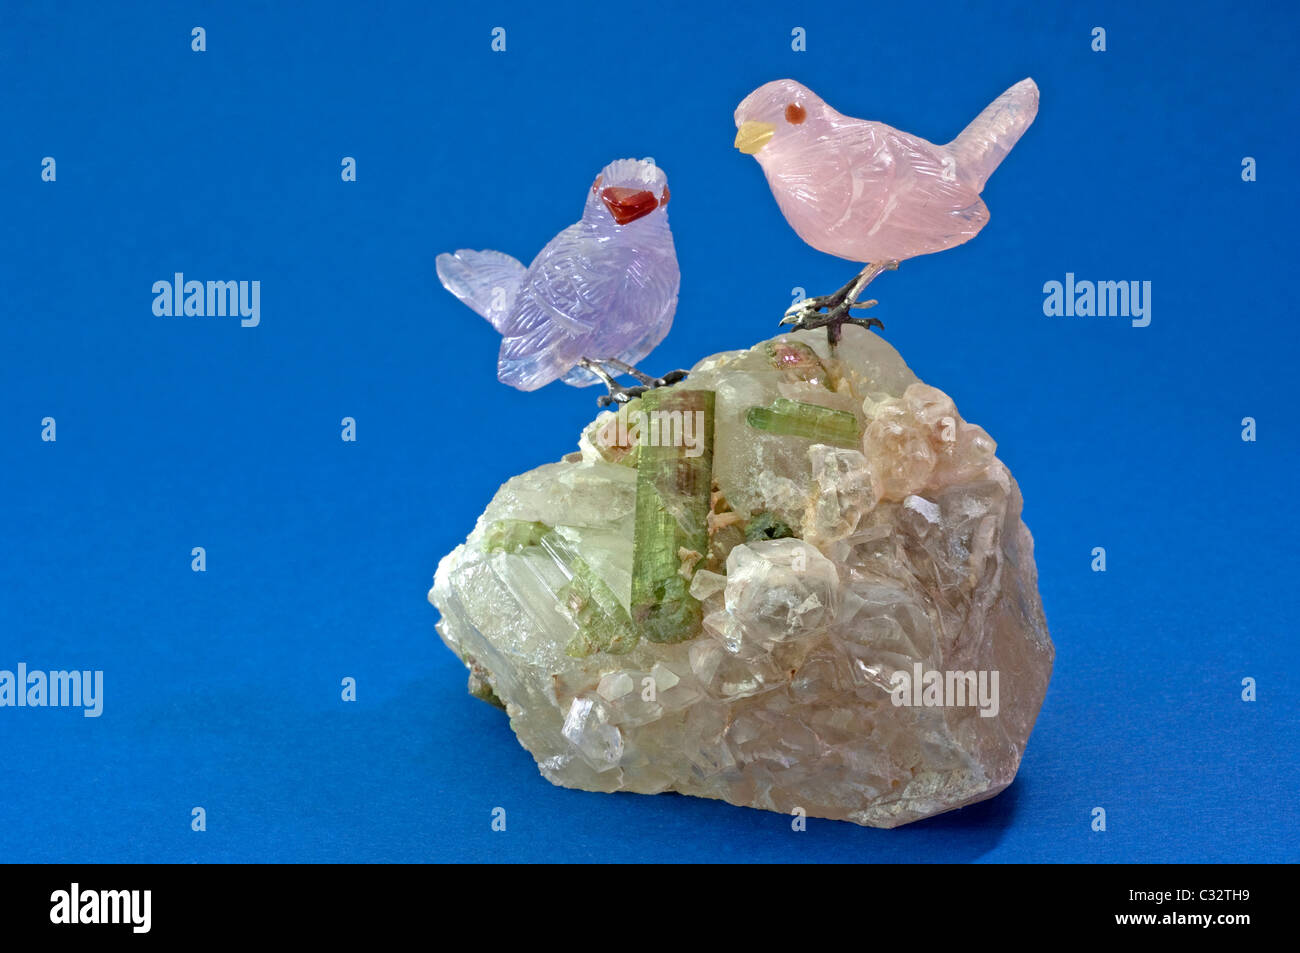 Sparrows made of Rose Quartz and Amethyst standing on a crystal with tourmaline. Studio picture against a blue background. Stock Photo